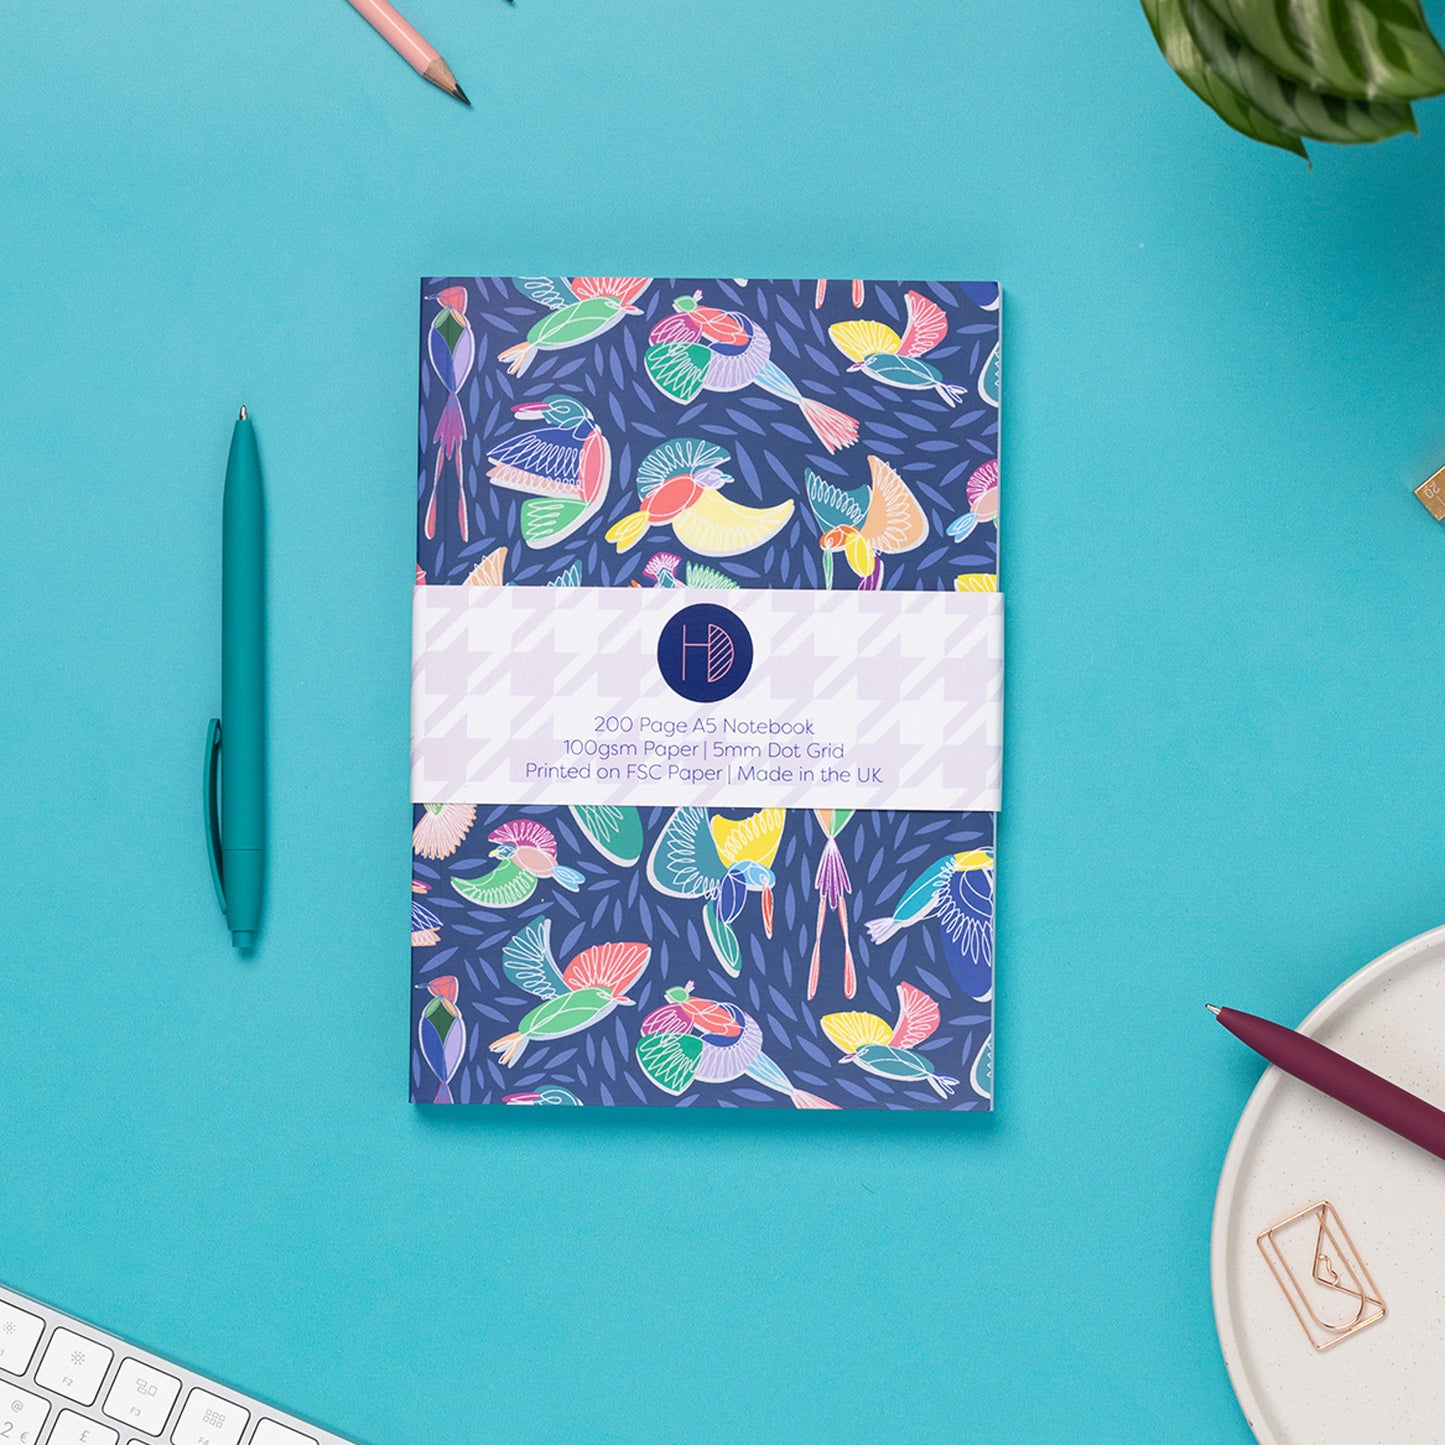 Paradise A5 Dot Grid Notebook, with its belly-band packaging around it, is on a teal desk with some pens, and a keyboard to the bottom left corner.  The book's cover features a navy background with line-drawn bird motifs and offset coloured blocks behind them.